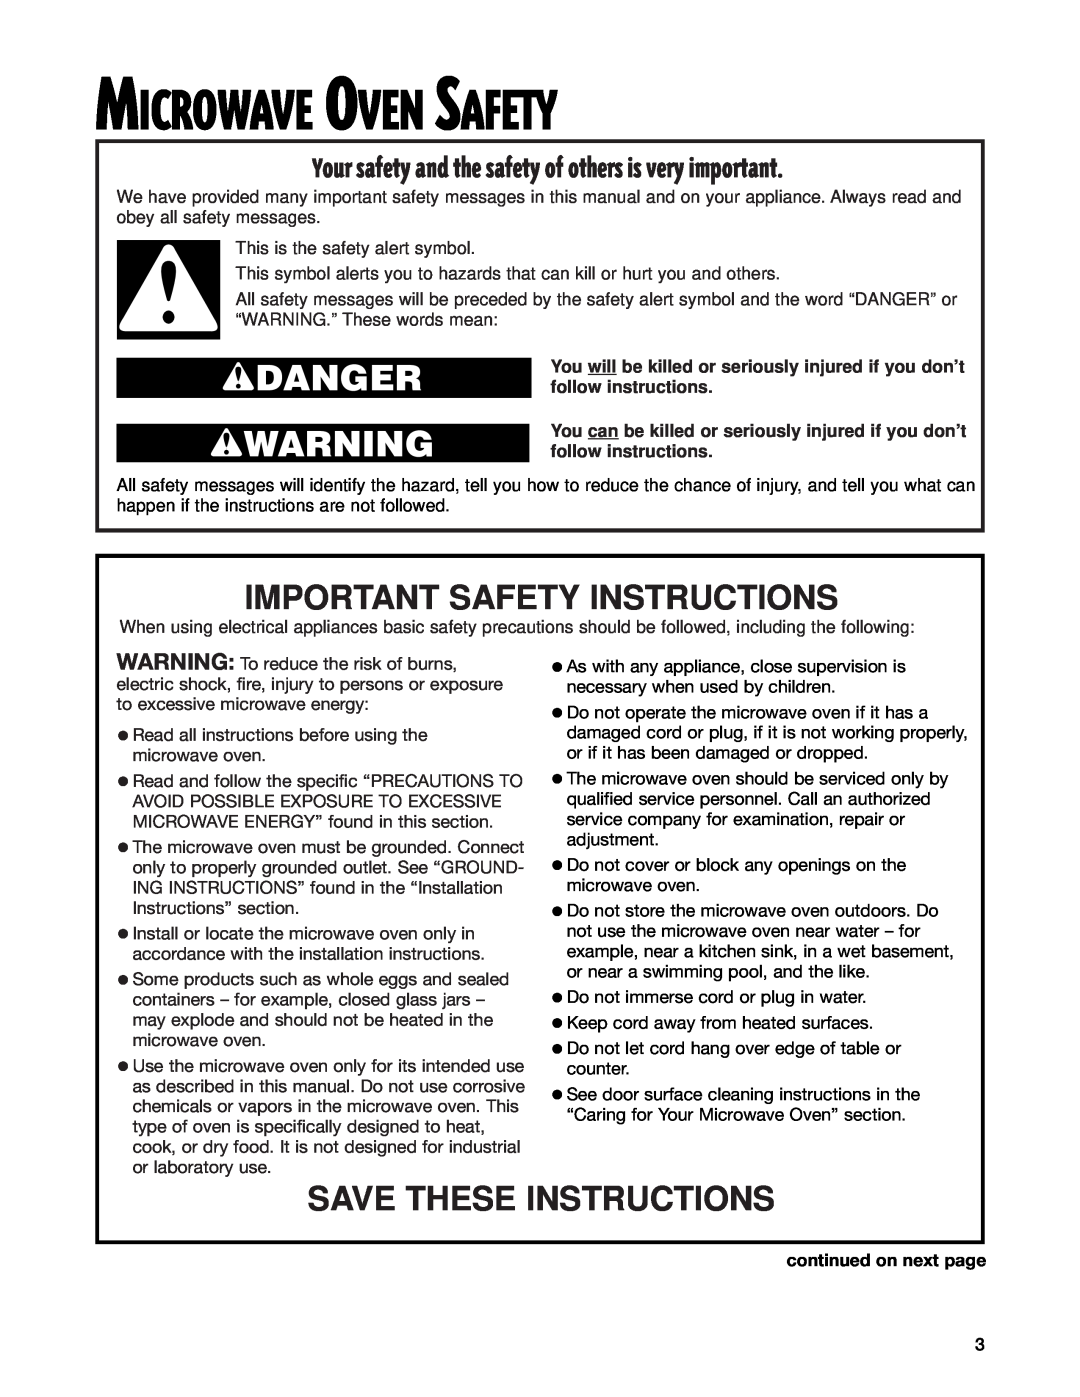 Whirlpool GT1195SH Microwave Oven Safety, Important Safety Instructions, Save These Instructions, wDANGER wWARNING 